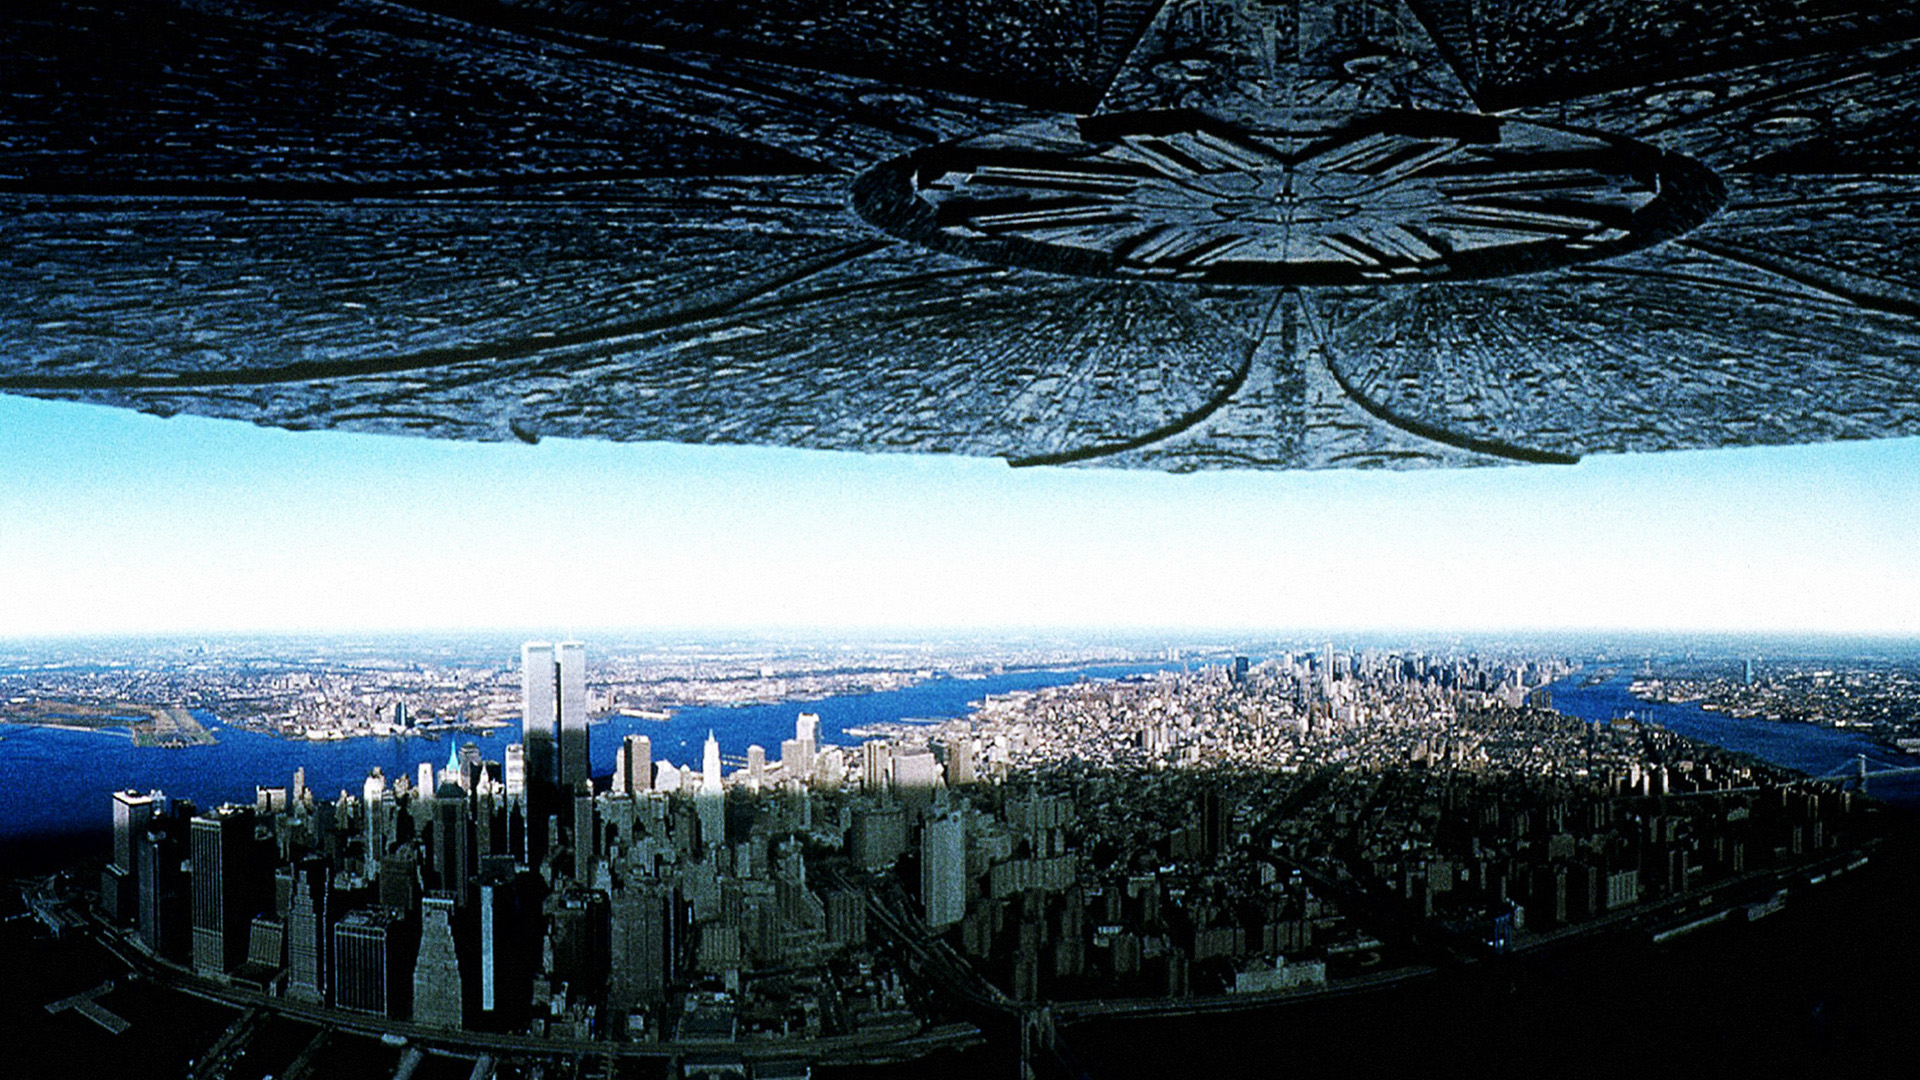 The theatrical movie poster shows an alien spaceship hovering over Manhattan, New York.